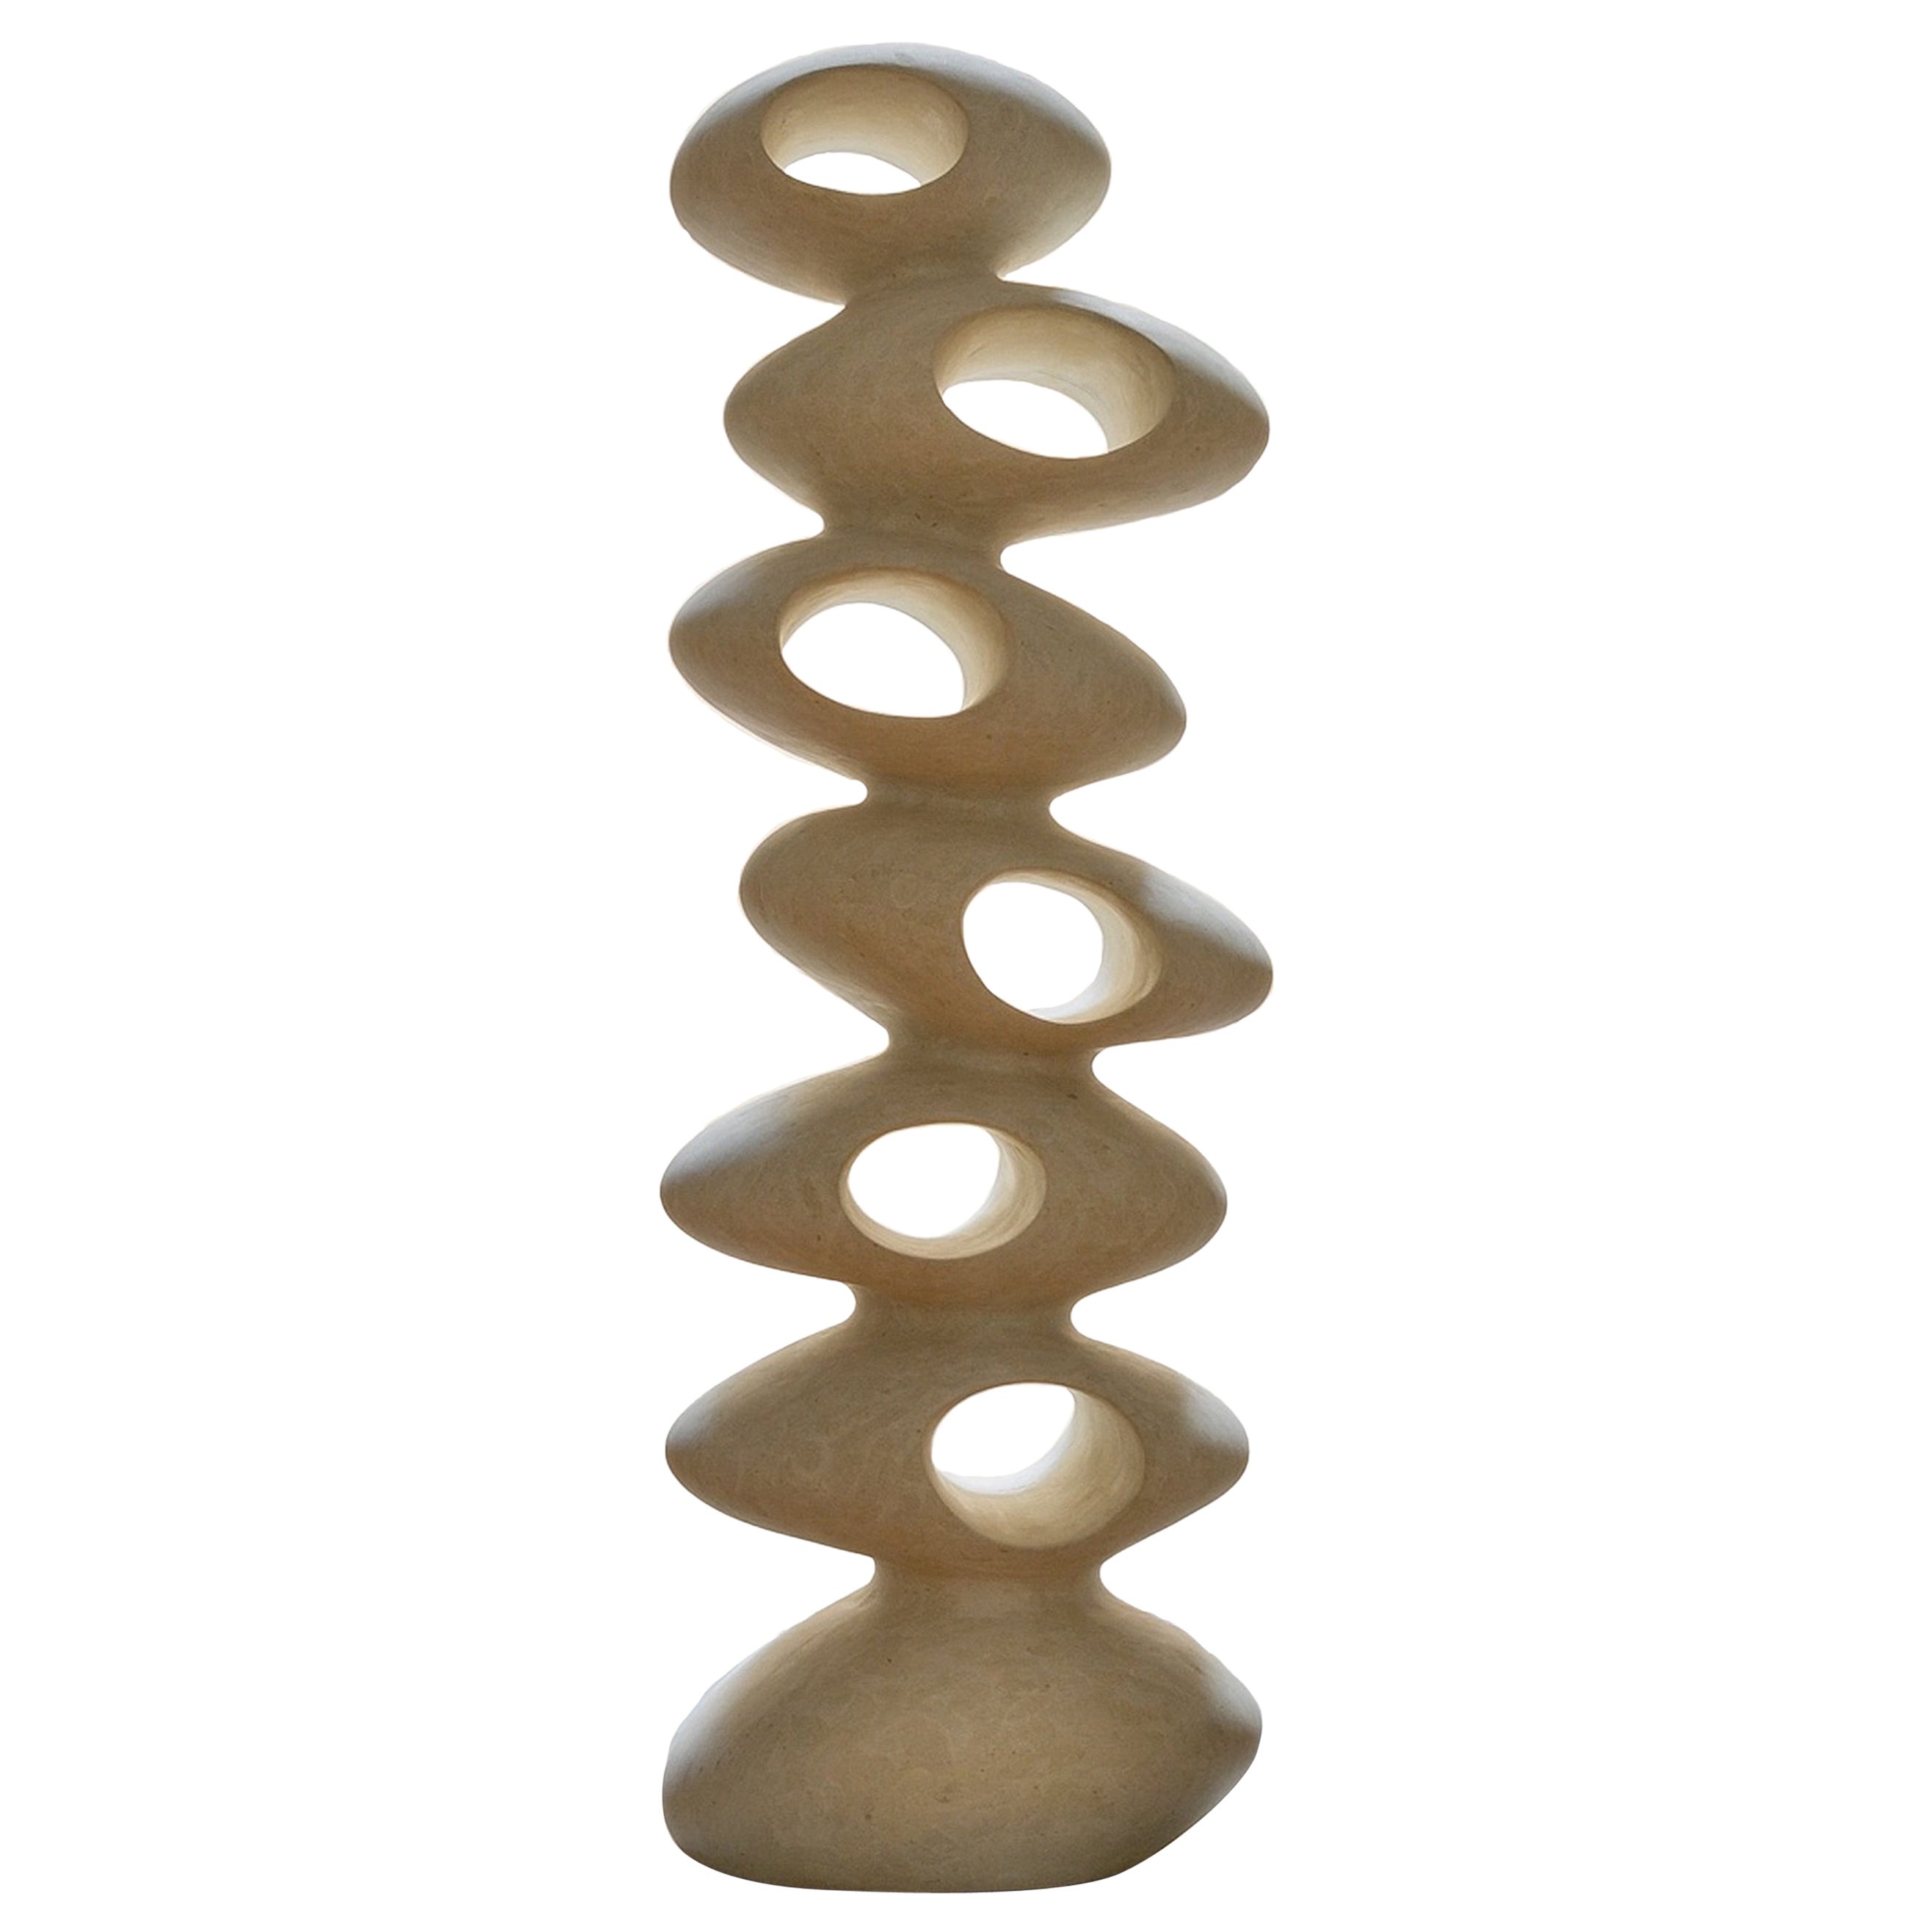 21st Century Abstract Sculpture INASIS 80 cm height by Renzo Buttazzo from Italy For Sale